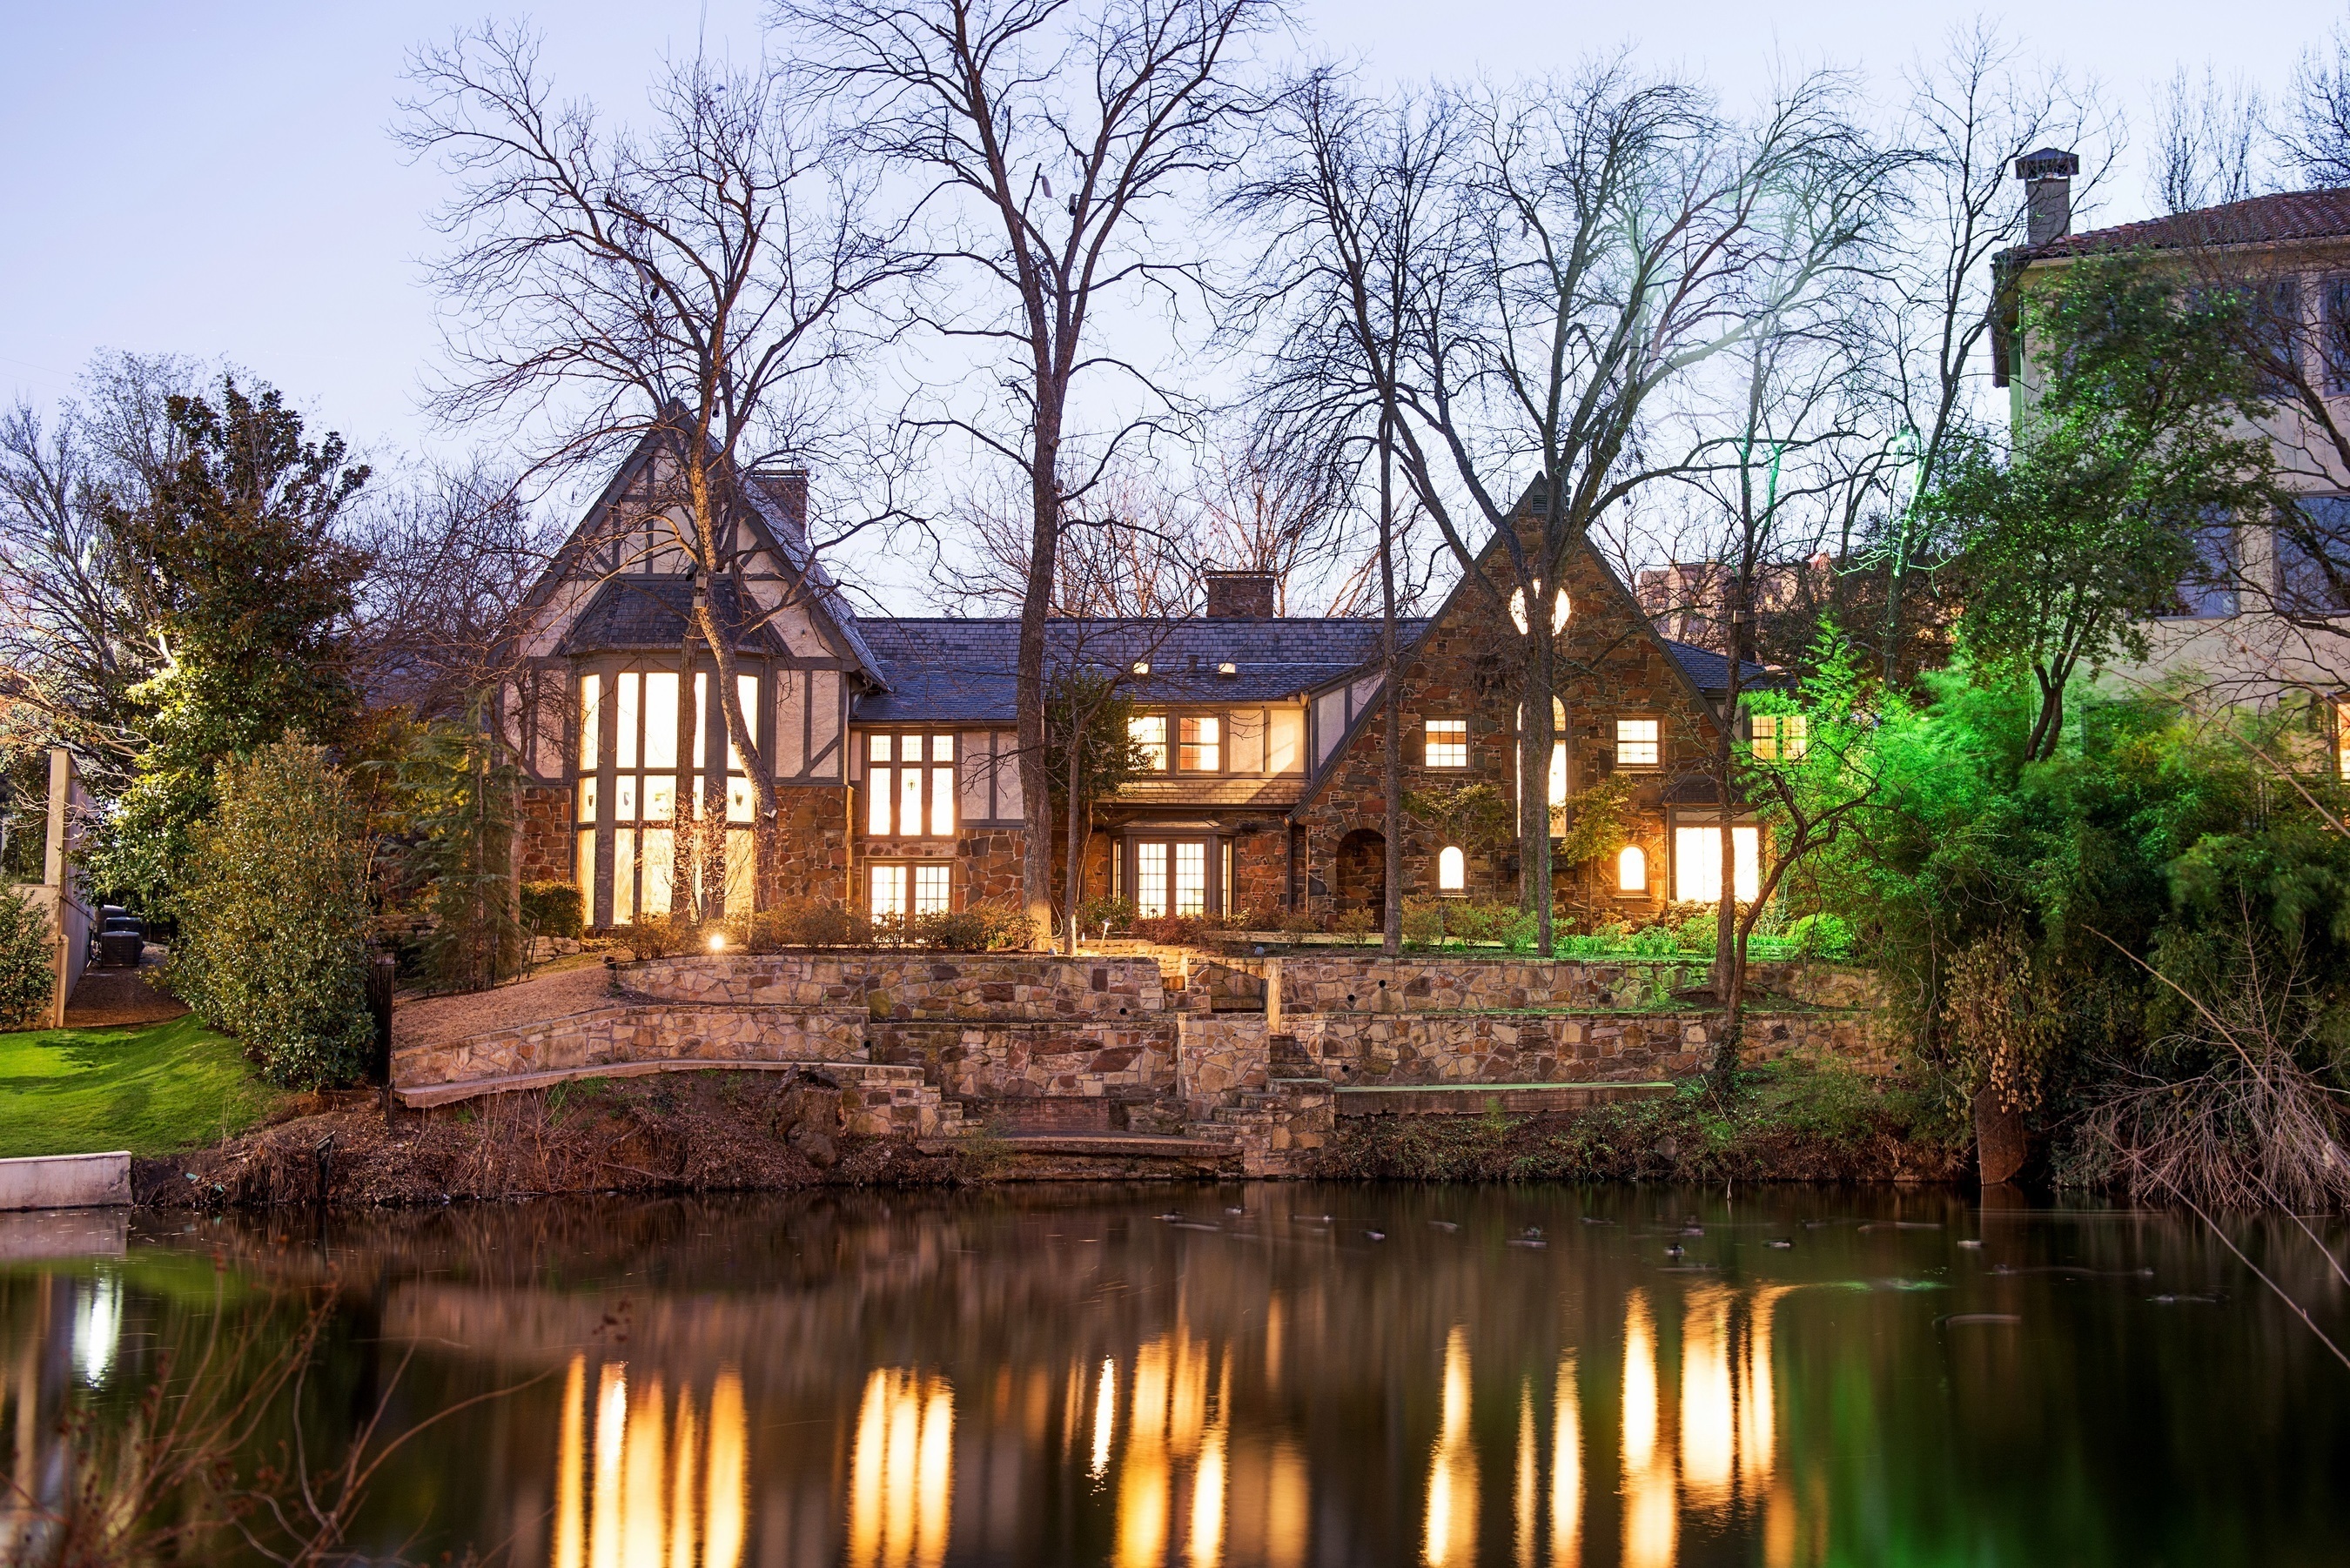 Following a live auction with 10 qualified bidders, the historic Les Jardins estate on Turtle Creek went under contract in cooperation with the Matthews Nicols Group of Allie Beth Allman & Associates. (PRNewsFoto/Concierge Auctions)